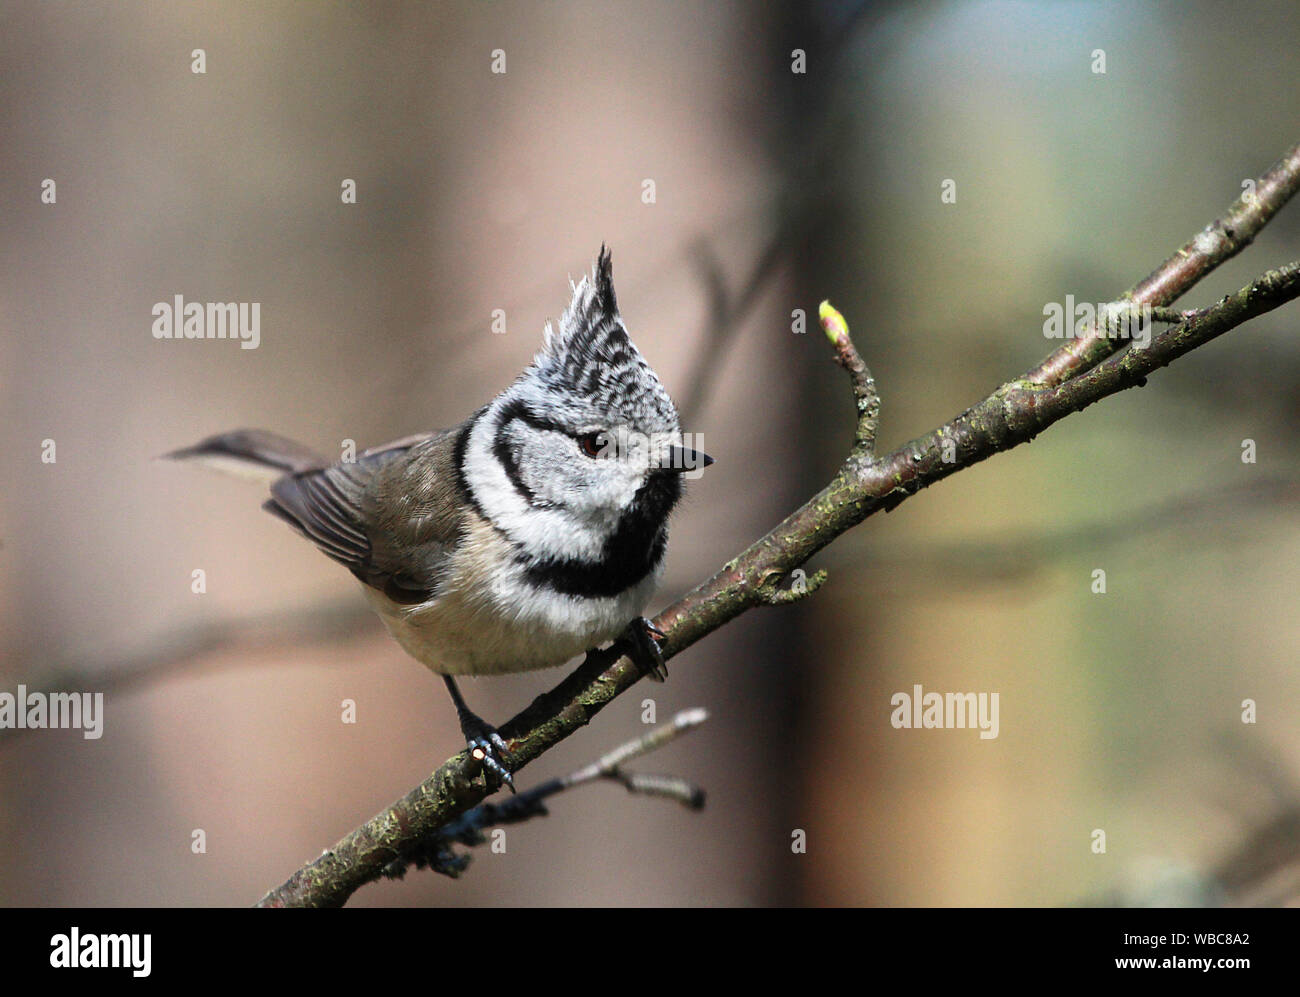 close up of a crested tit (Lophophanes cristatus)  sitting on a bare branch on bokeh background Stock Photo